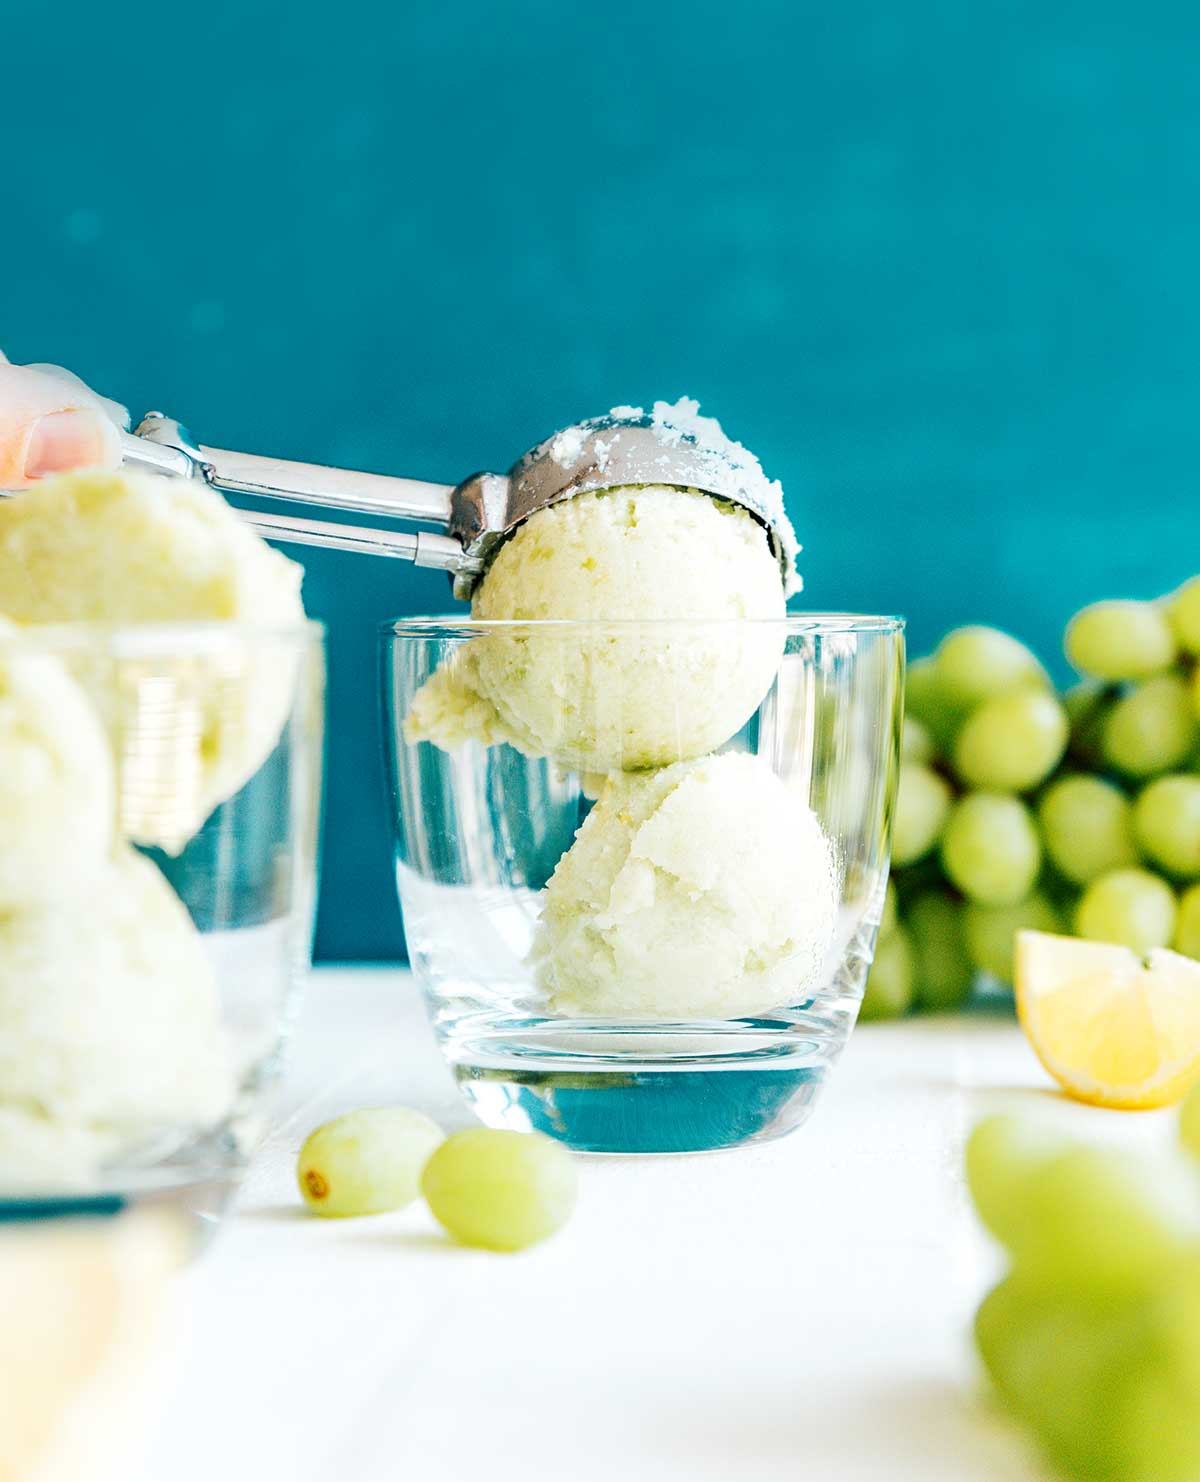 Scooping green grape sorbet into a glass on a blue background